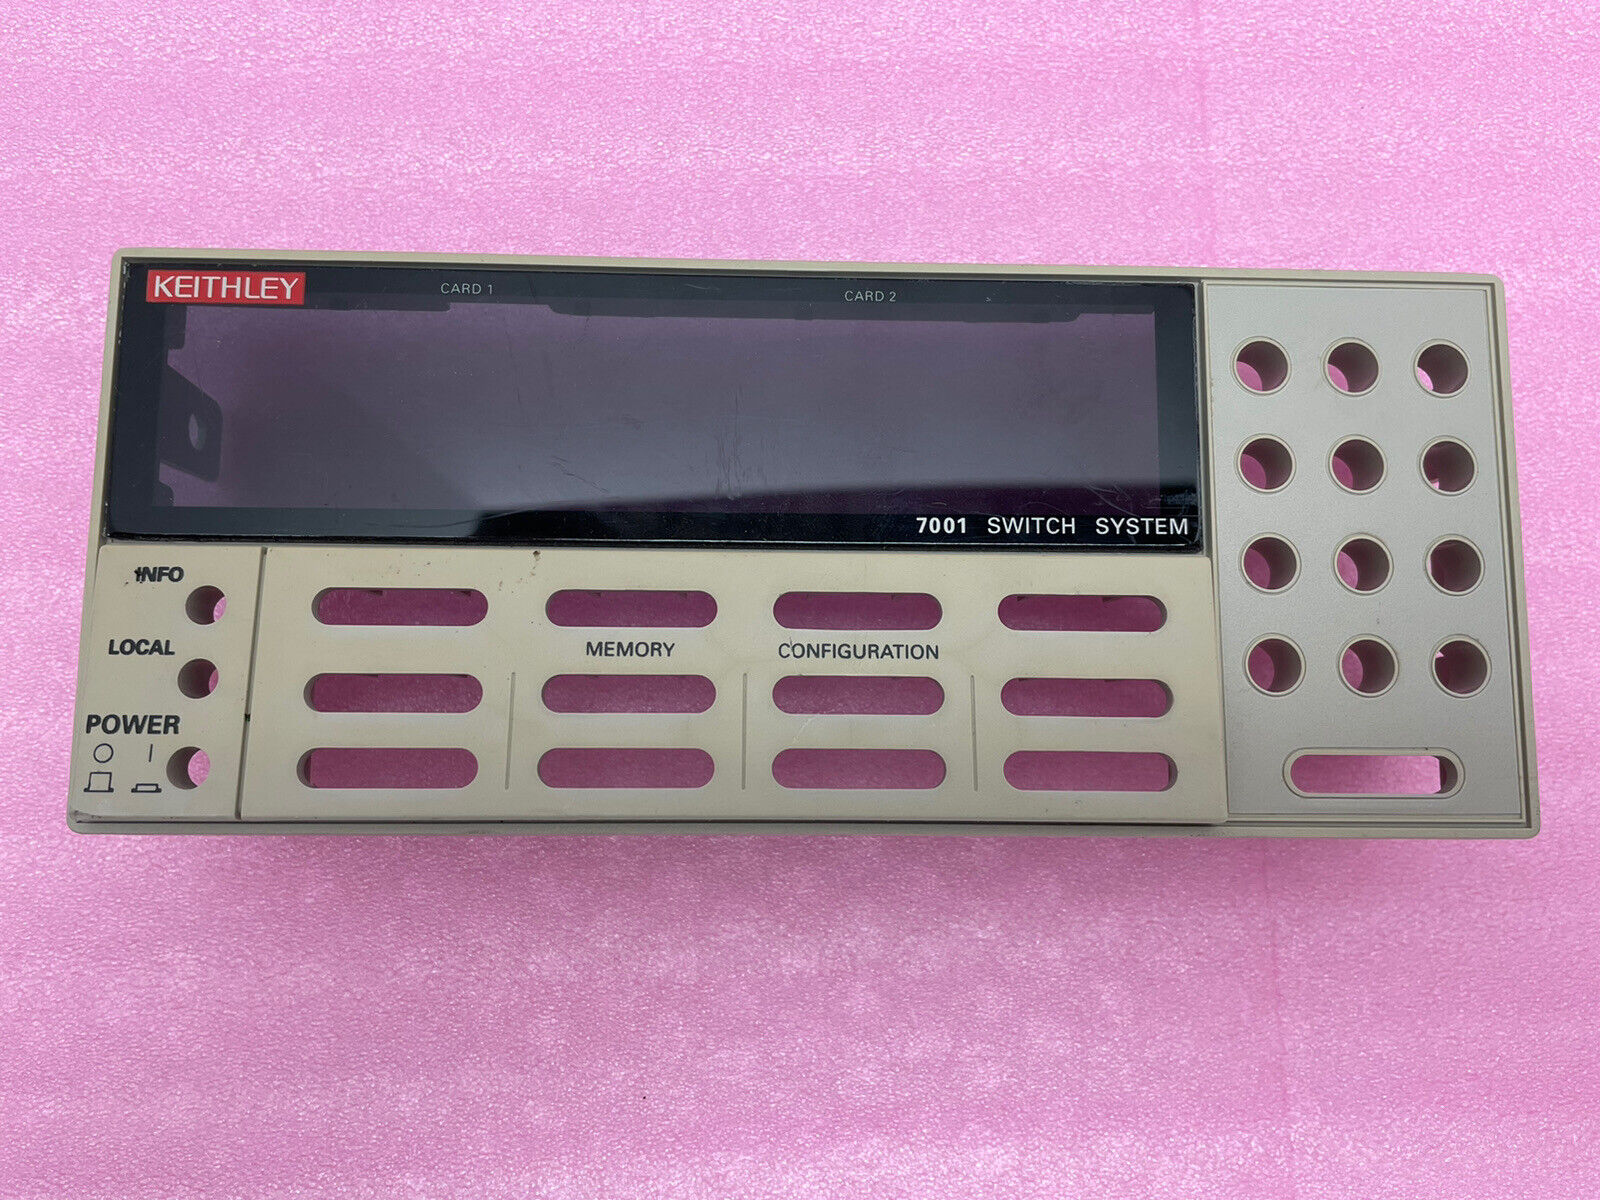 KEITHLEY 7001 SWITCH SYSTEM FACE PLATE FACEPLATE - USED